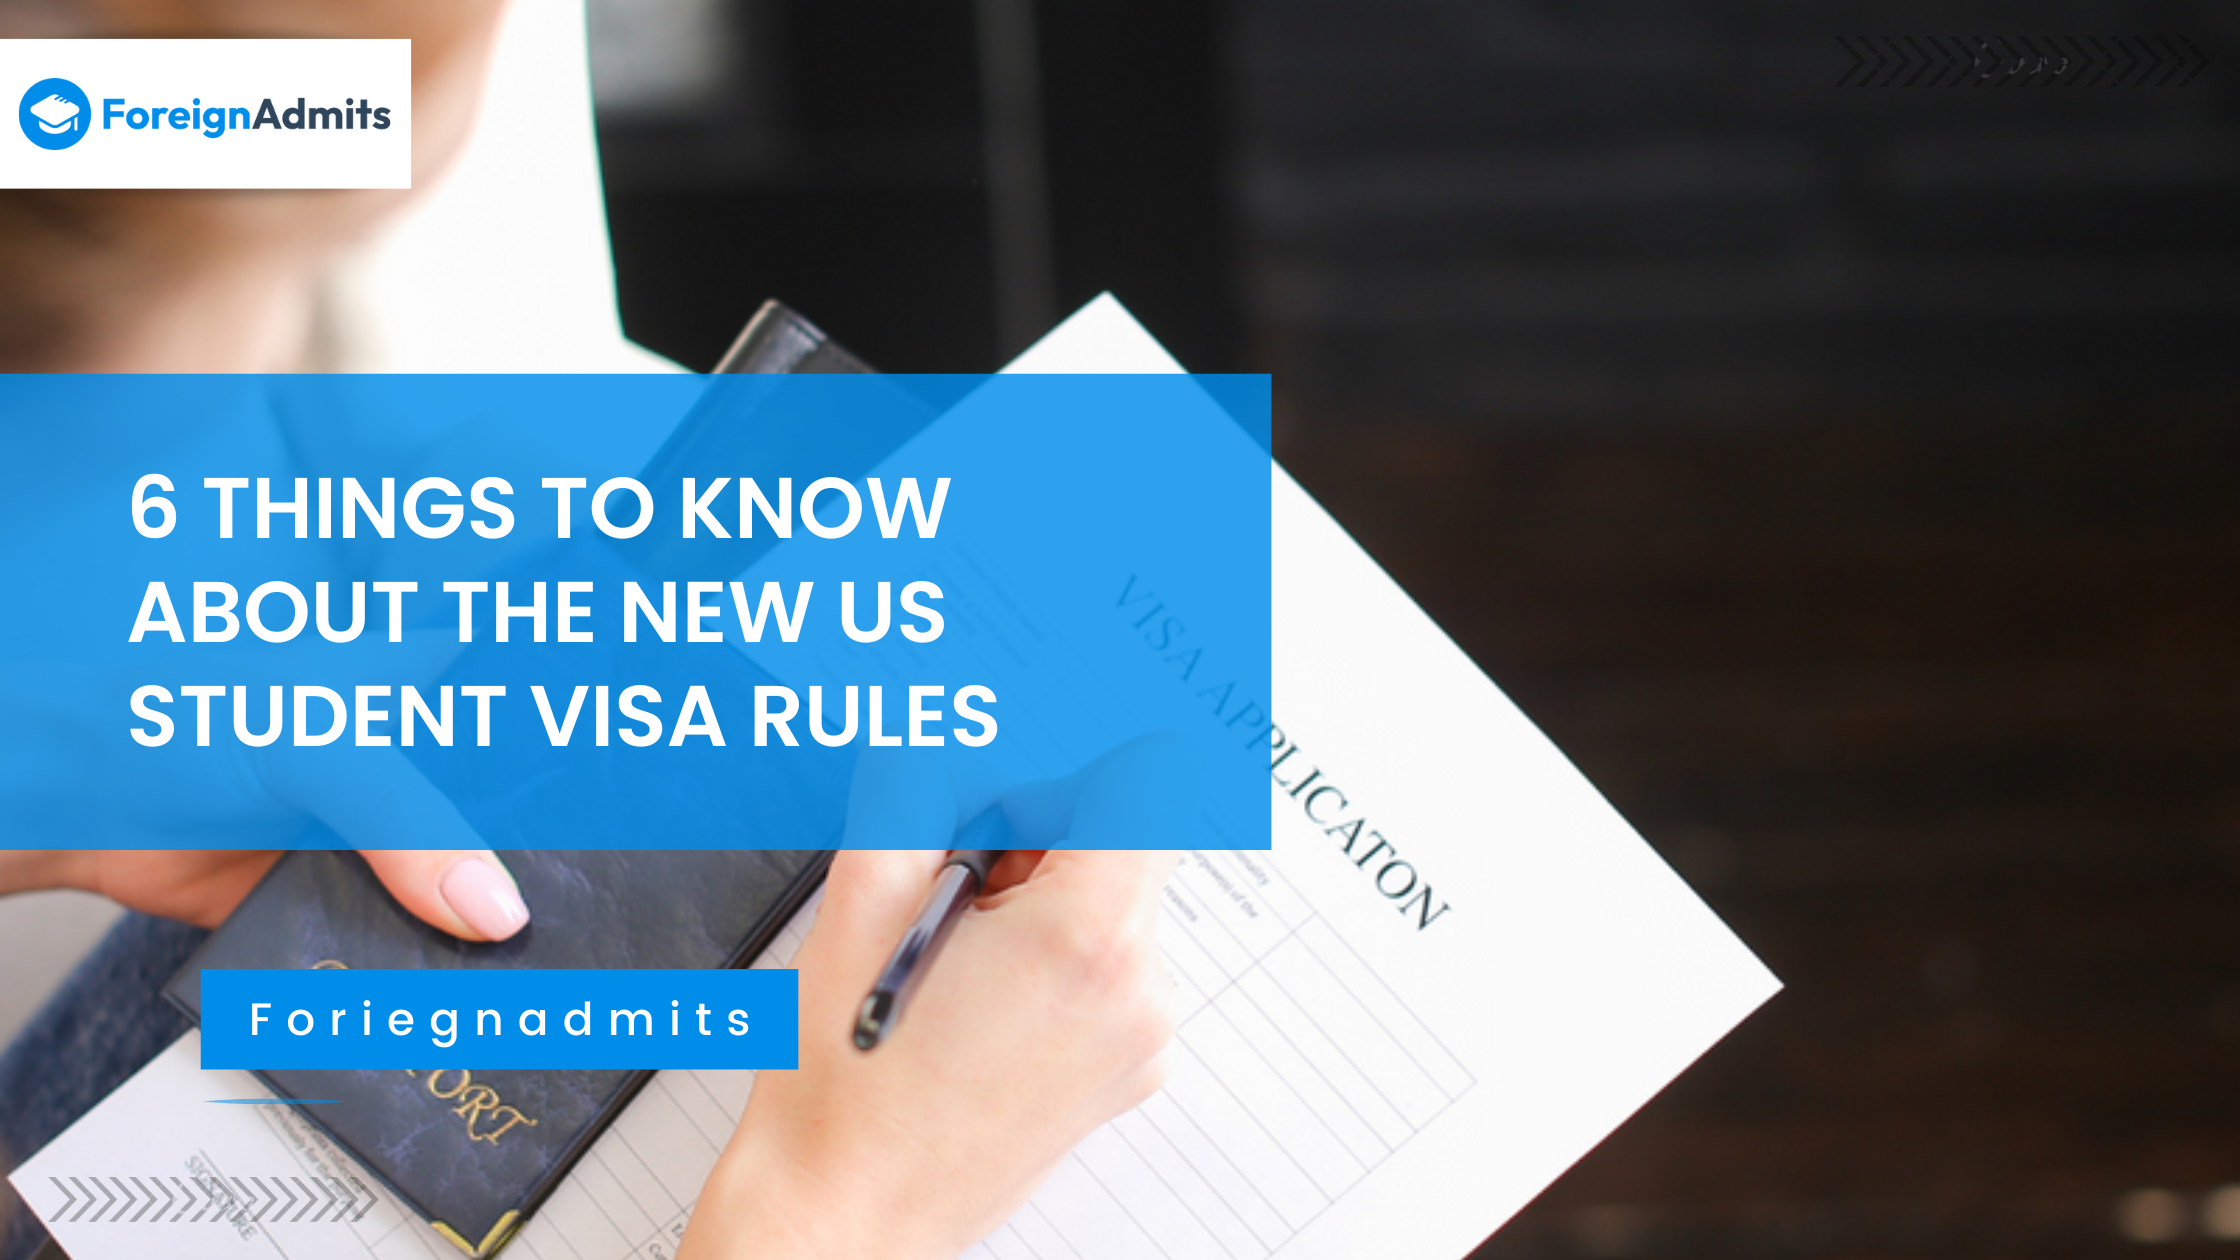 6 Things to Know about the New US Student Visa Rules